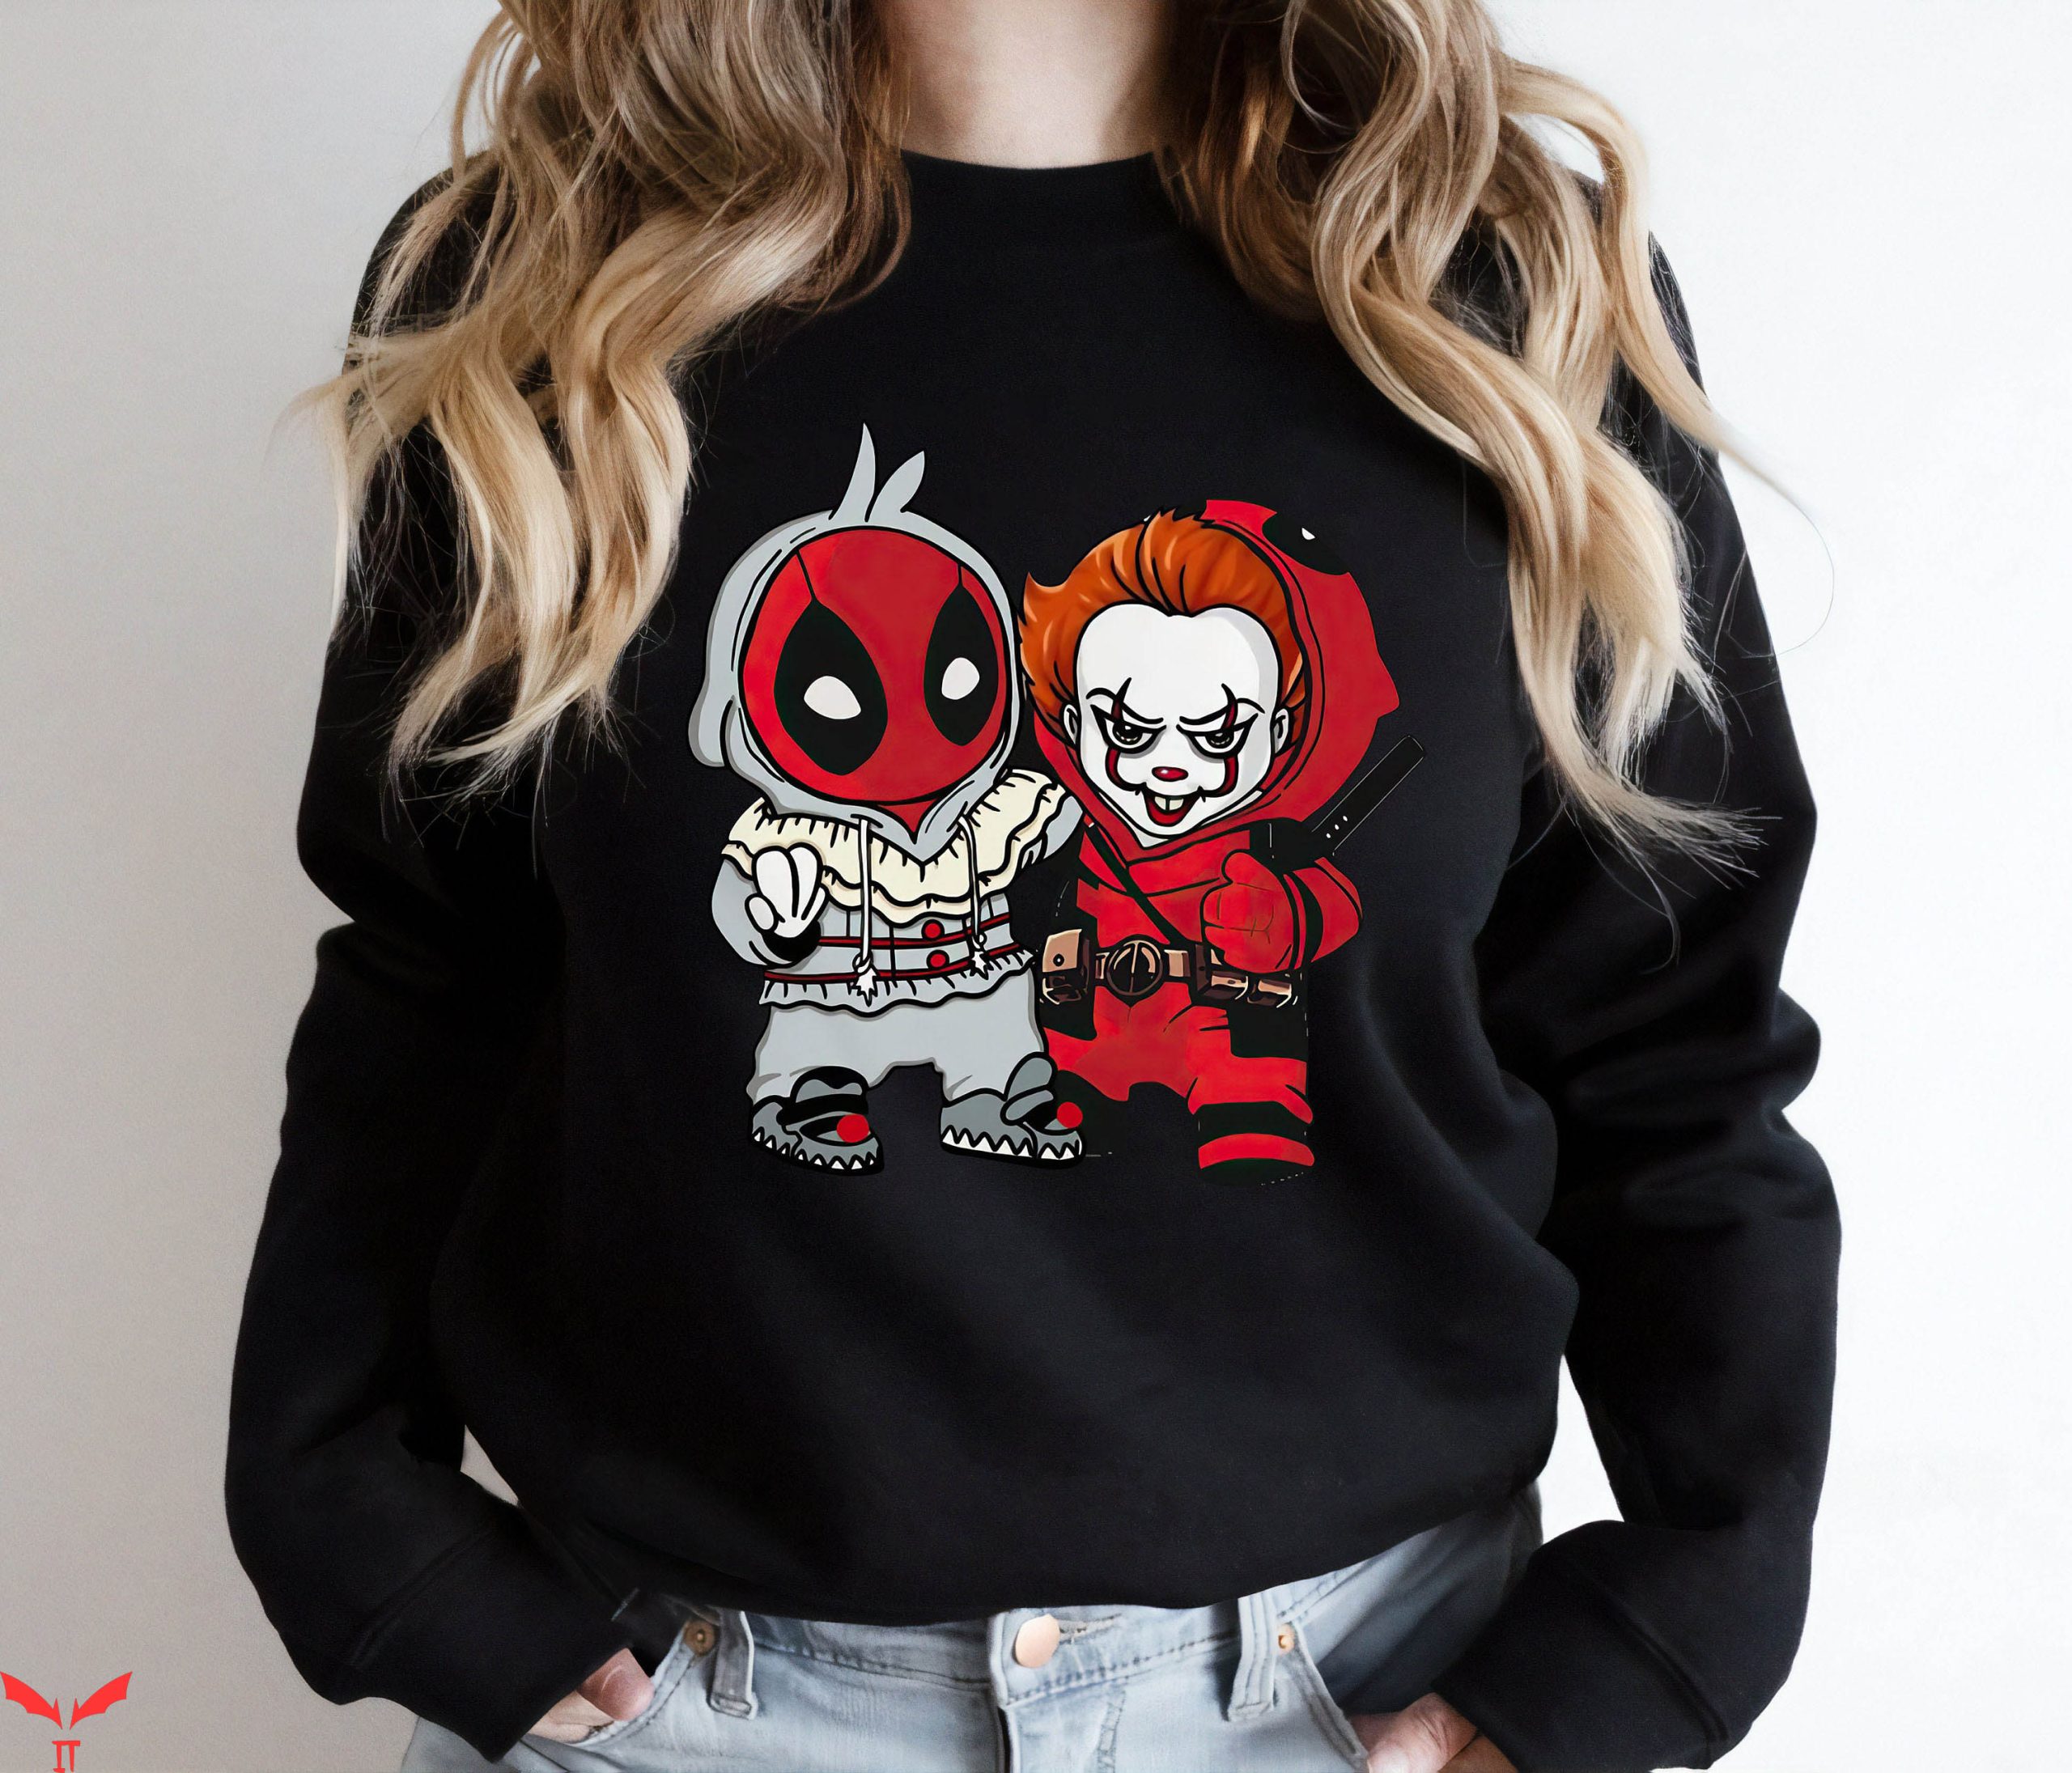 IT The Clown T-Shirt Marvel Deadpool And Pennywise Friends